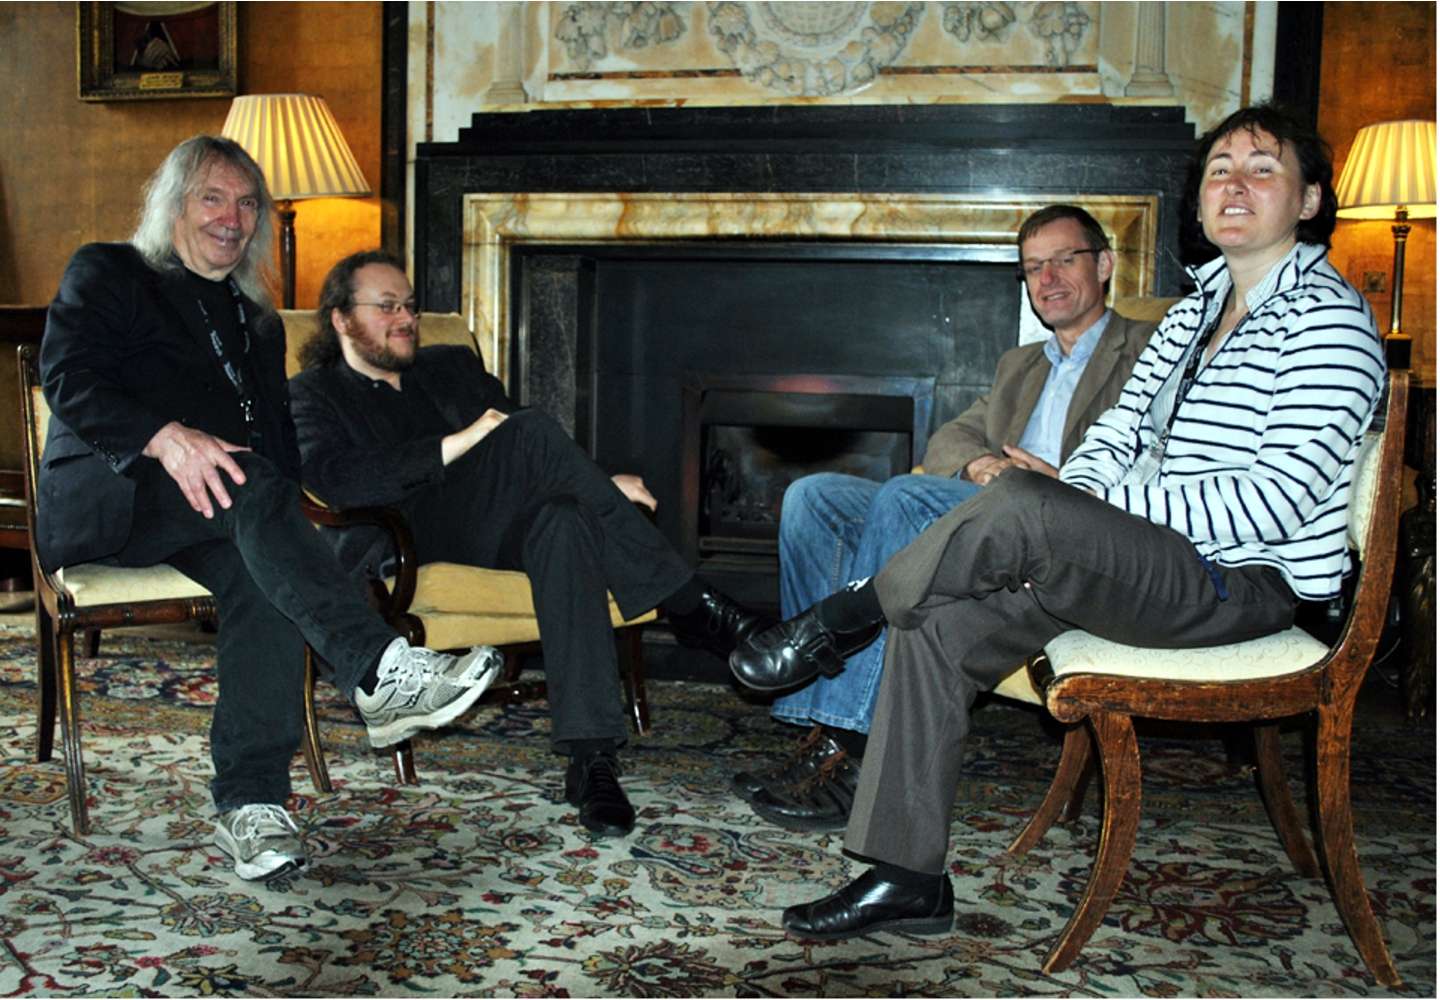 Four of the five organisers of the programme “Semantics & Syntax”: S. Barry Cooper, Benedikt Löwe, Arnold Beckmann, Elvira Mayordomo (from left to right). Photo taken by Sara Wilkinson in the Old Combination Room at Corpus Christi College, Cambridge, June 2012.